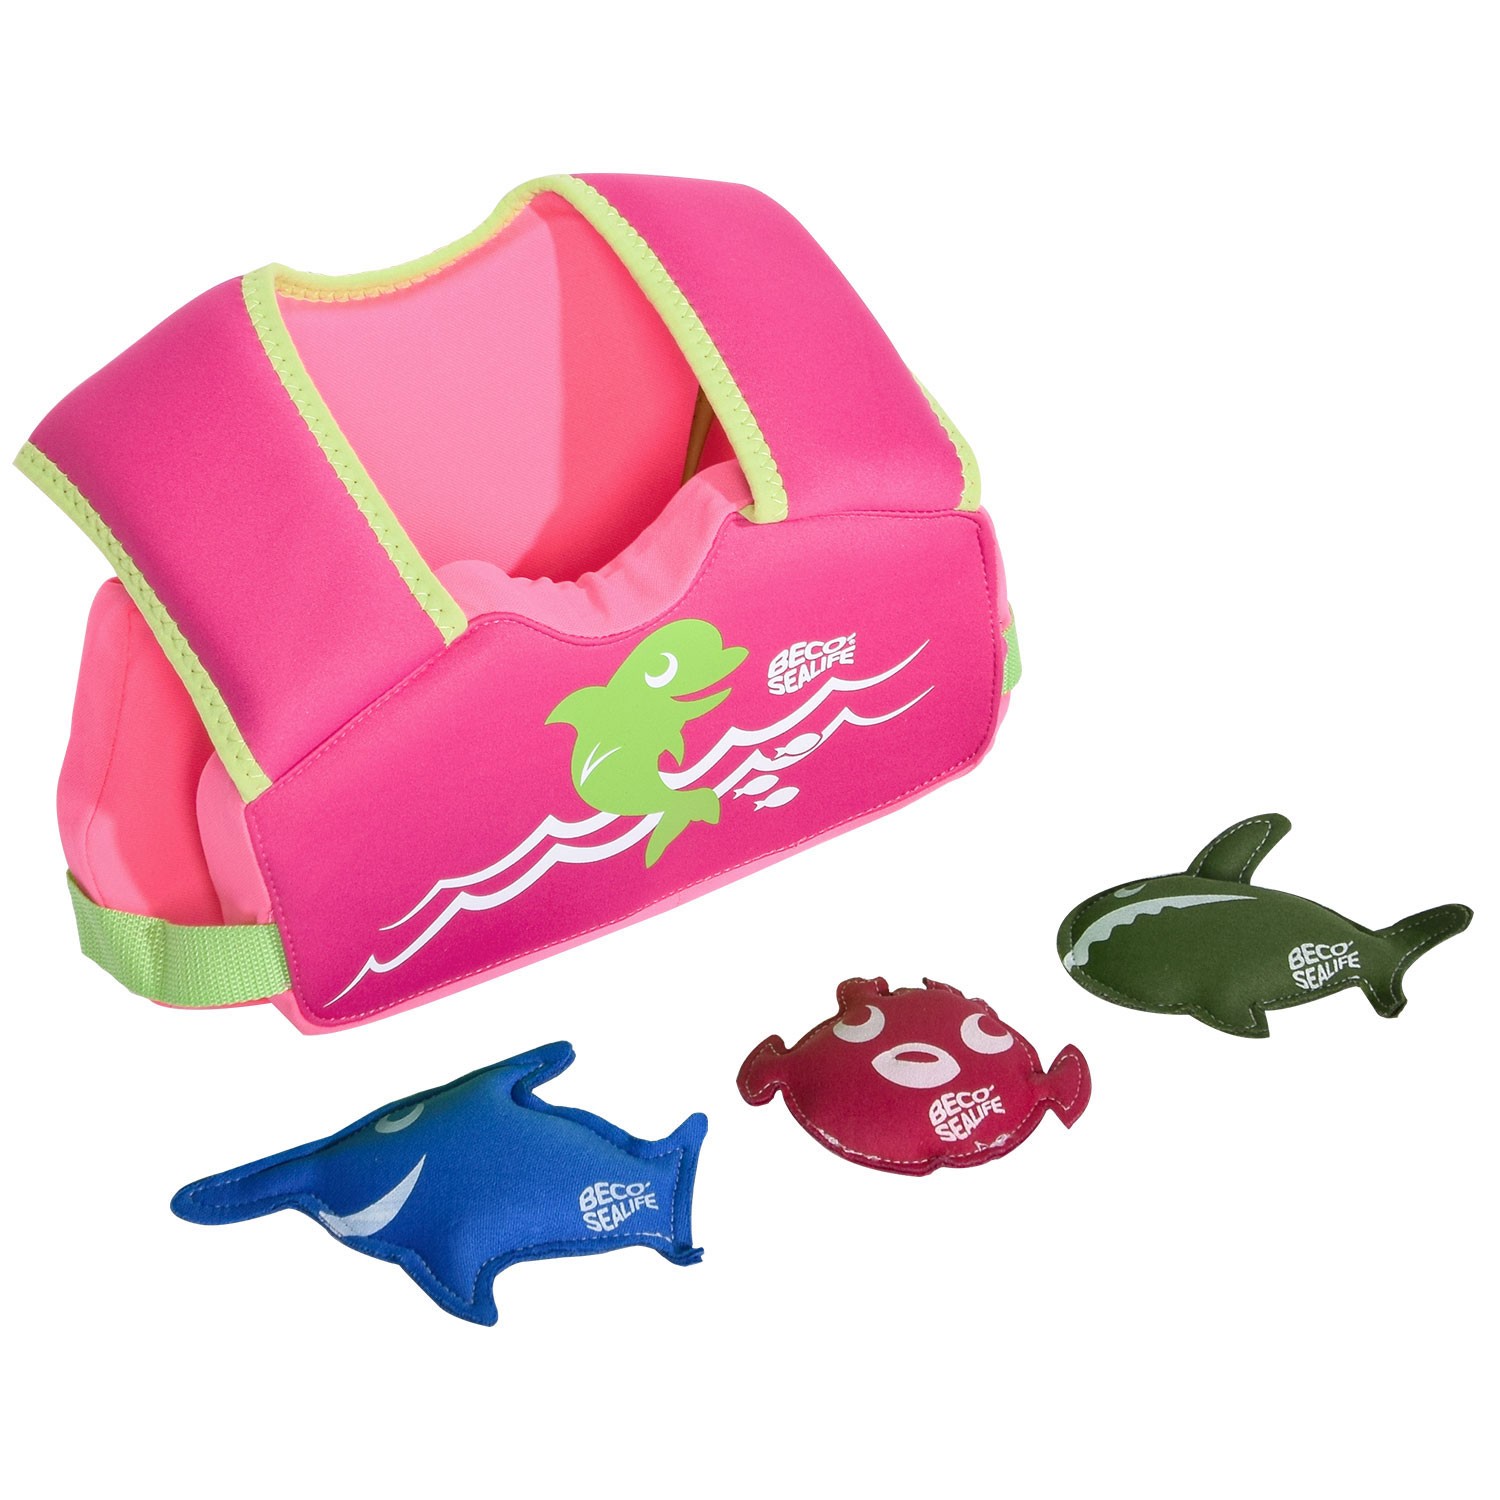 Beco Sealife Schwimmweste EASY FIT & 3 Tauchtiere